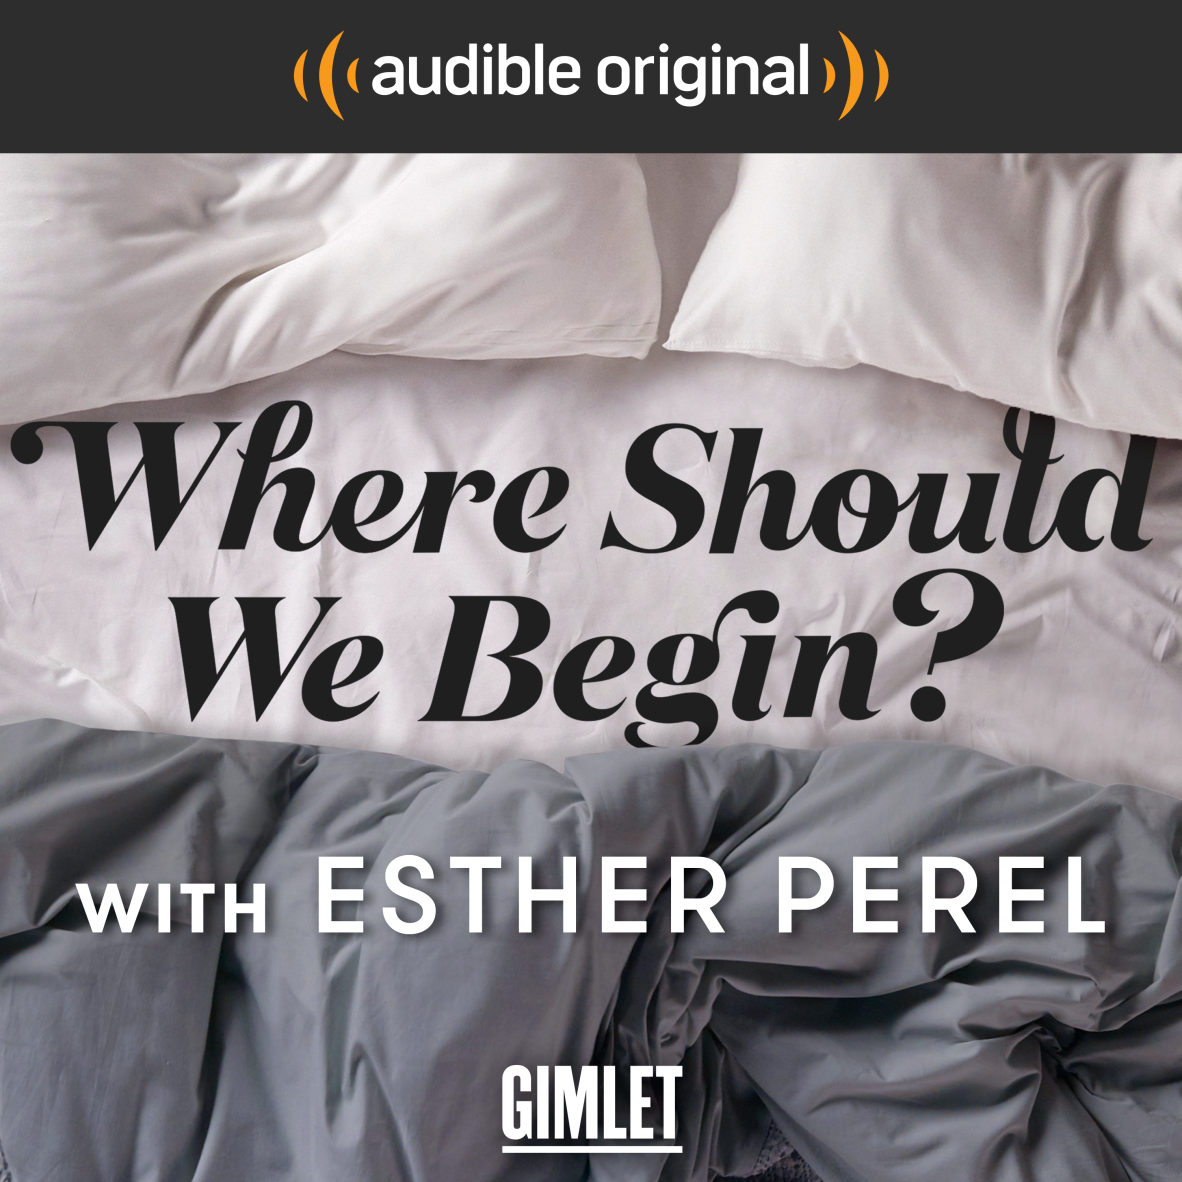 Where Shouold We Begin with Esther Perel